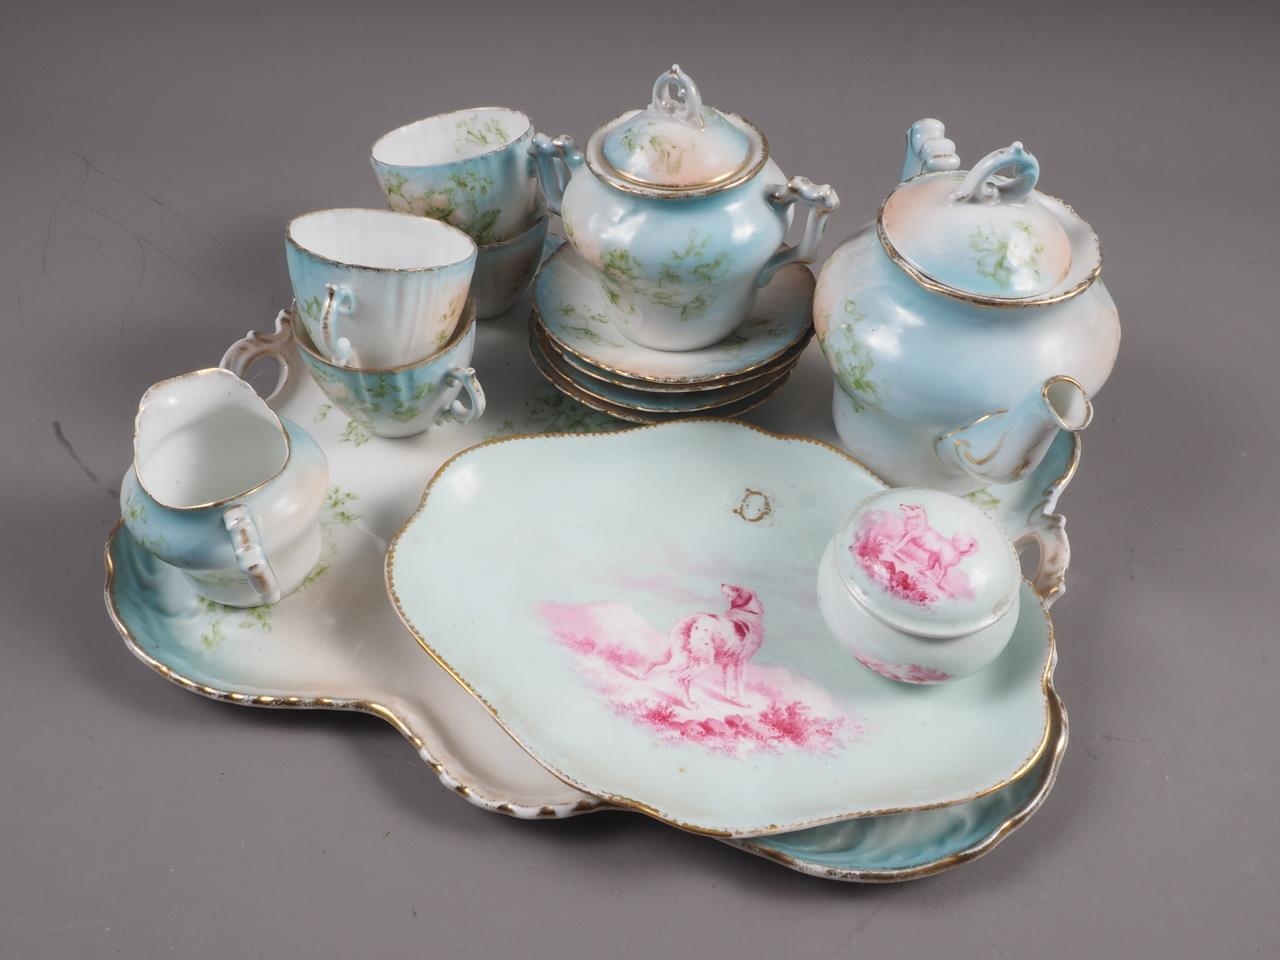 A late 19th century Continental porcelain floral decorated afternoon teaset for four with tray, a